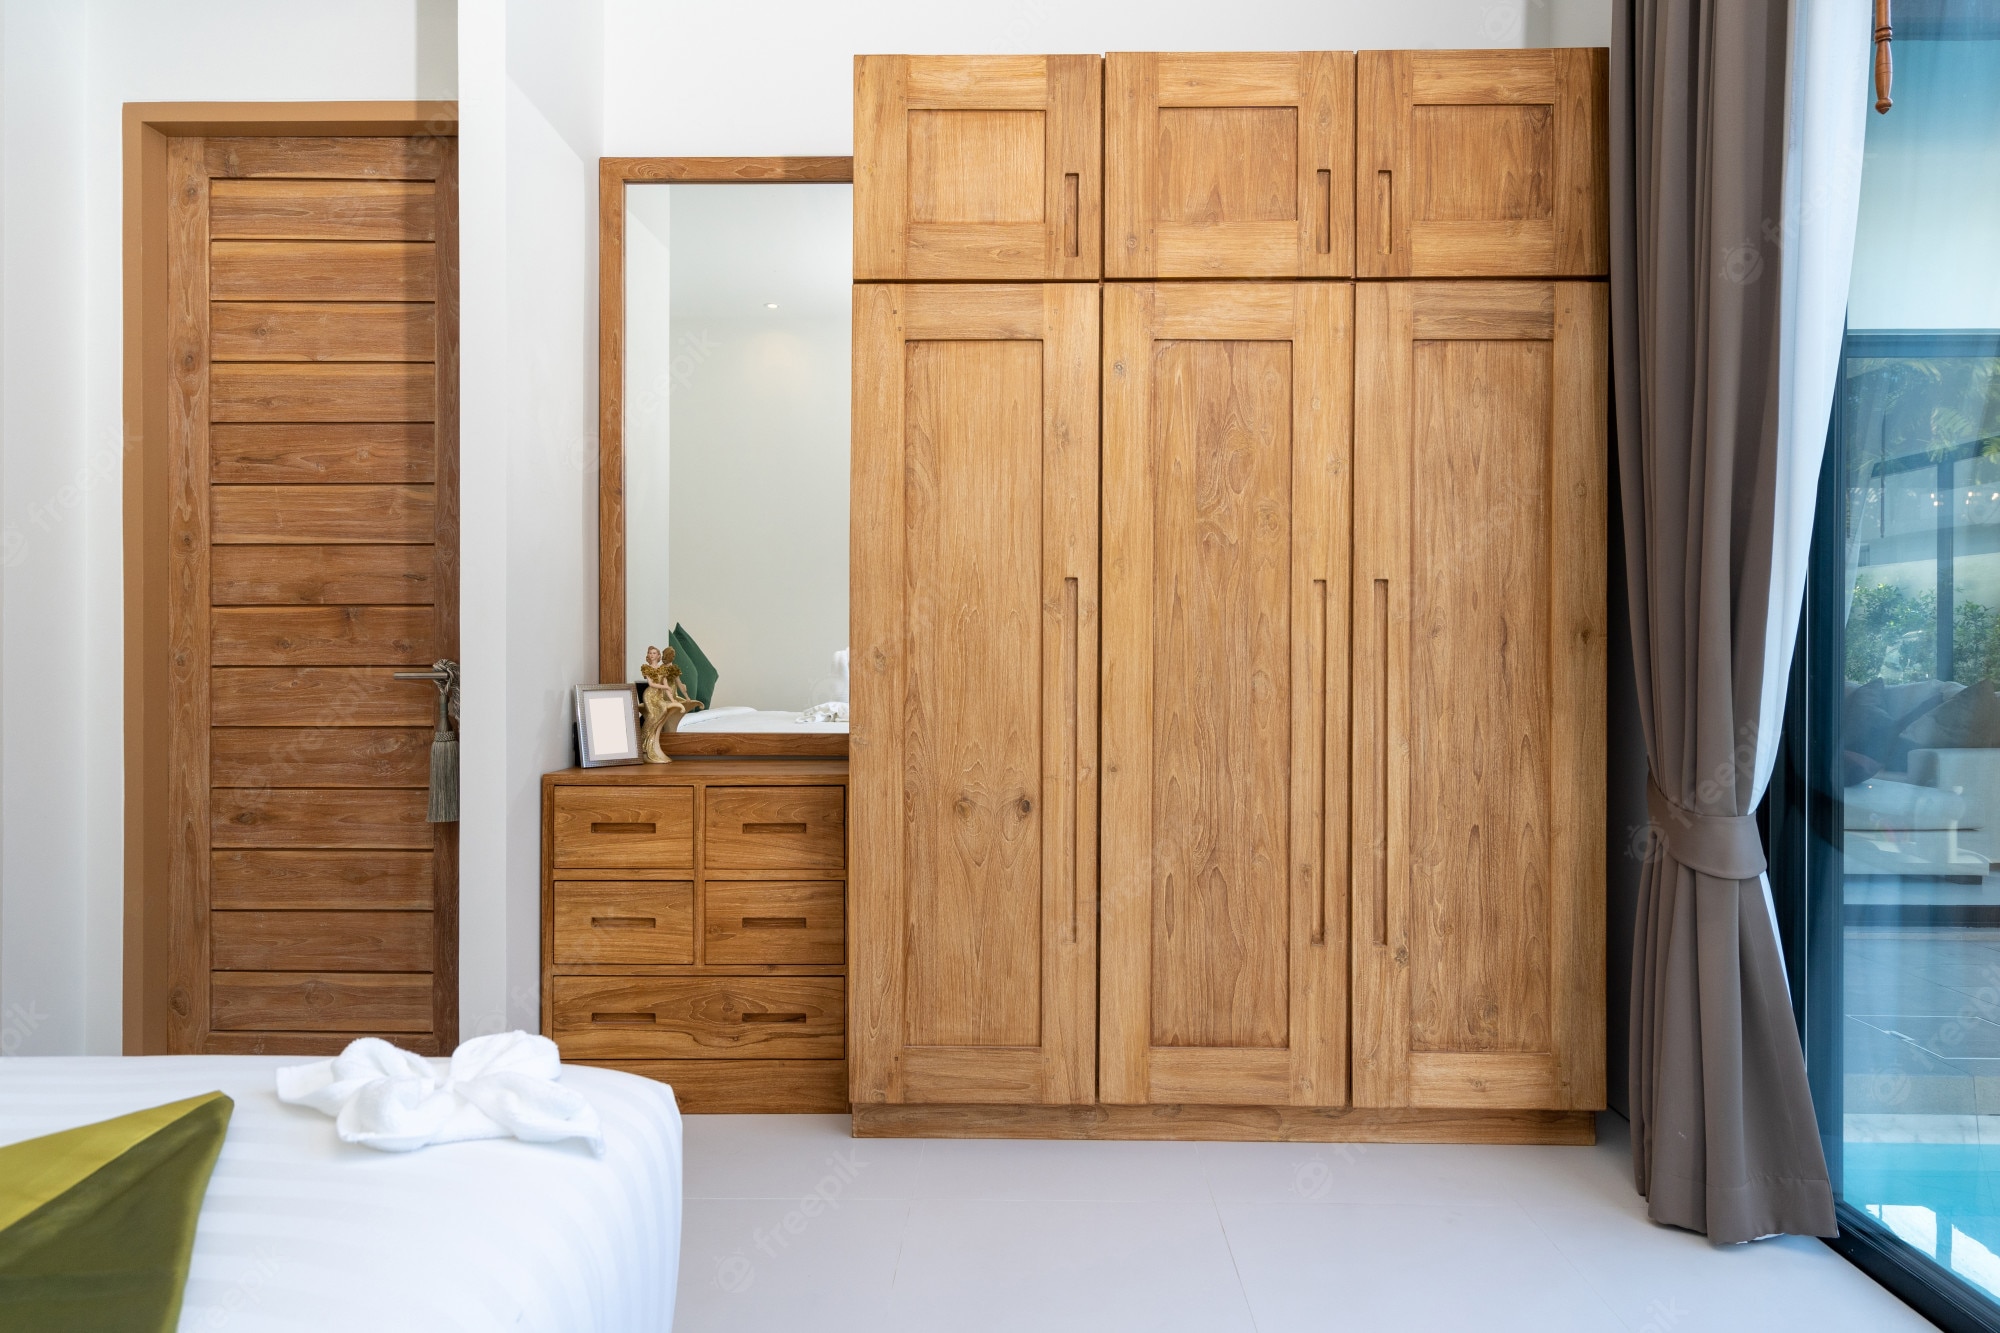 Wooden Wardrobe on Pepperfry: The Great Design and Functionality